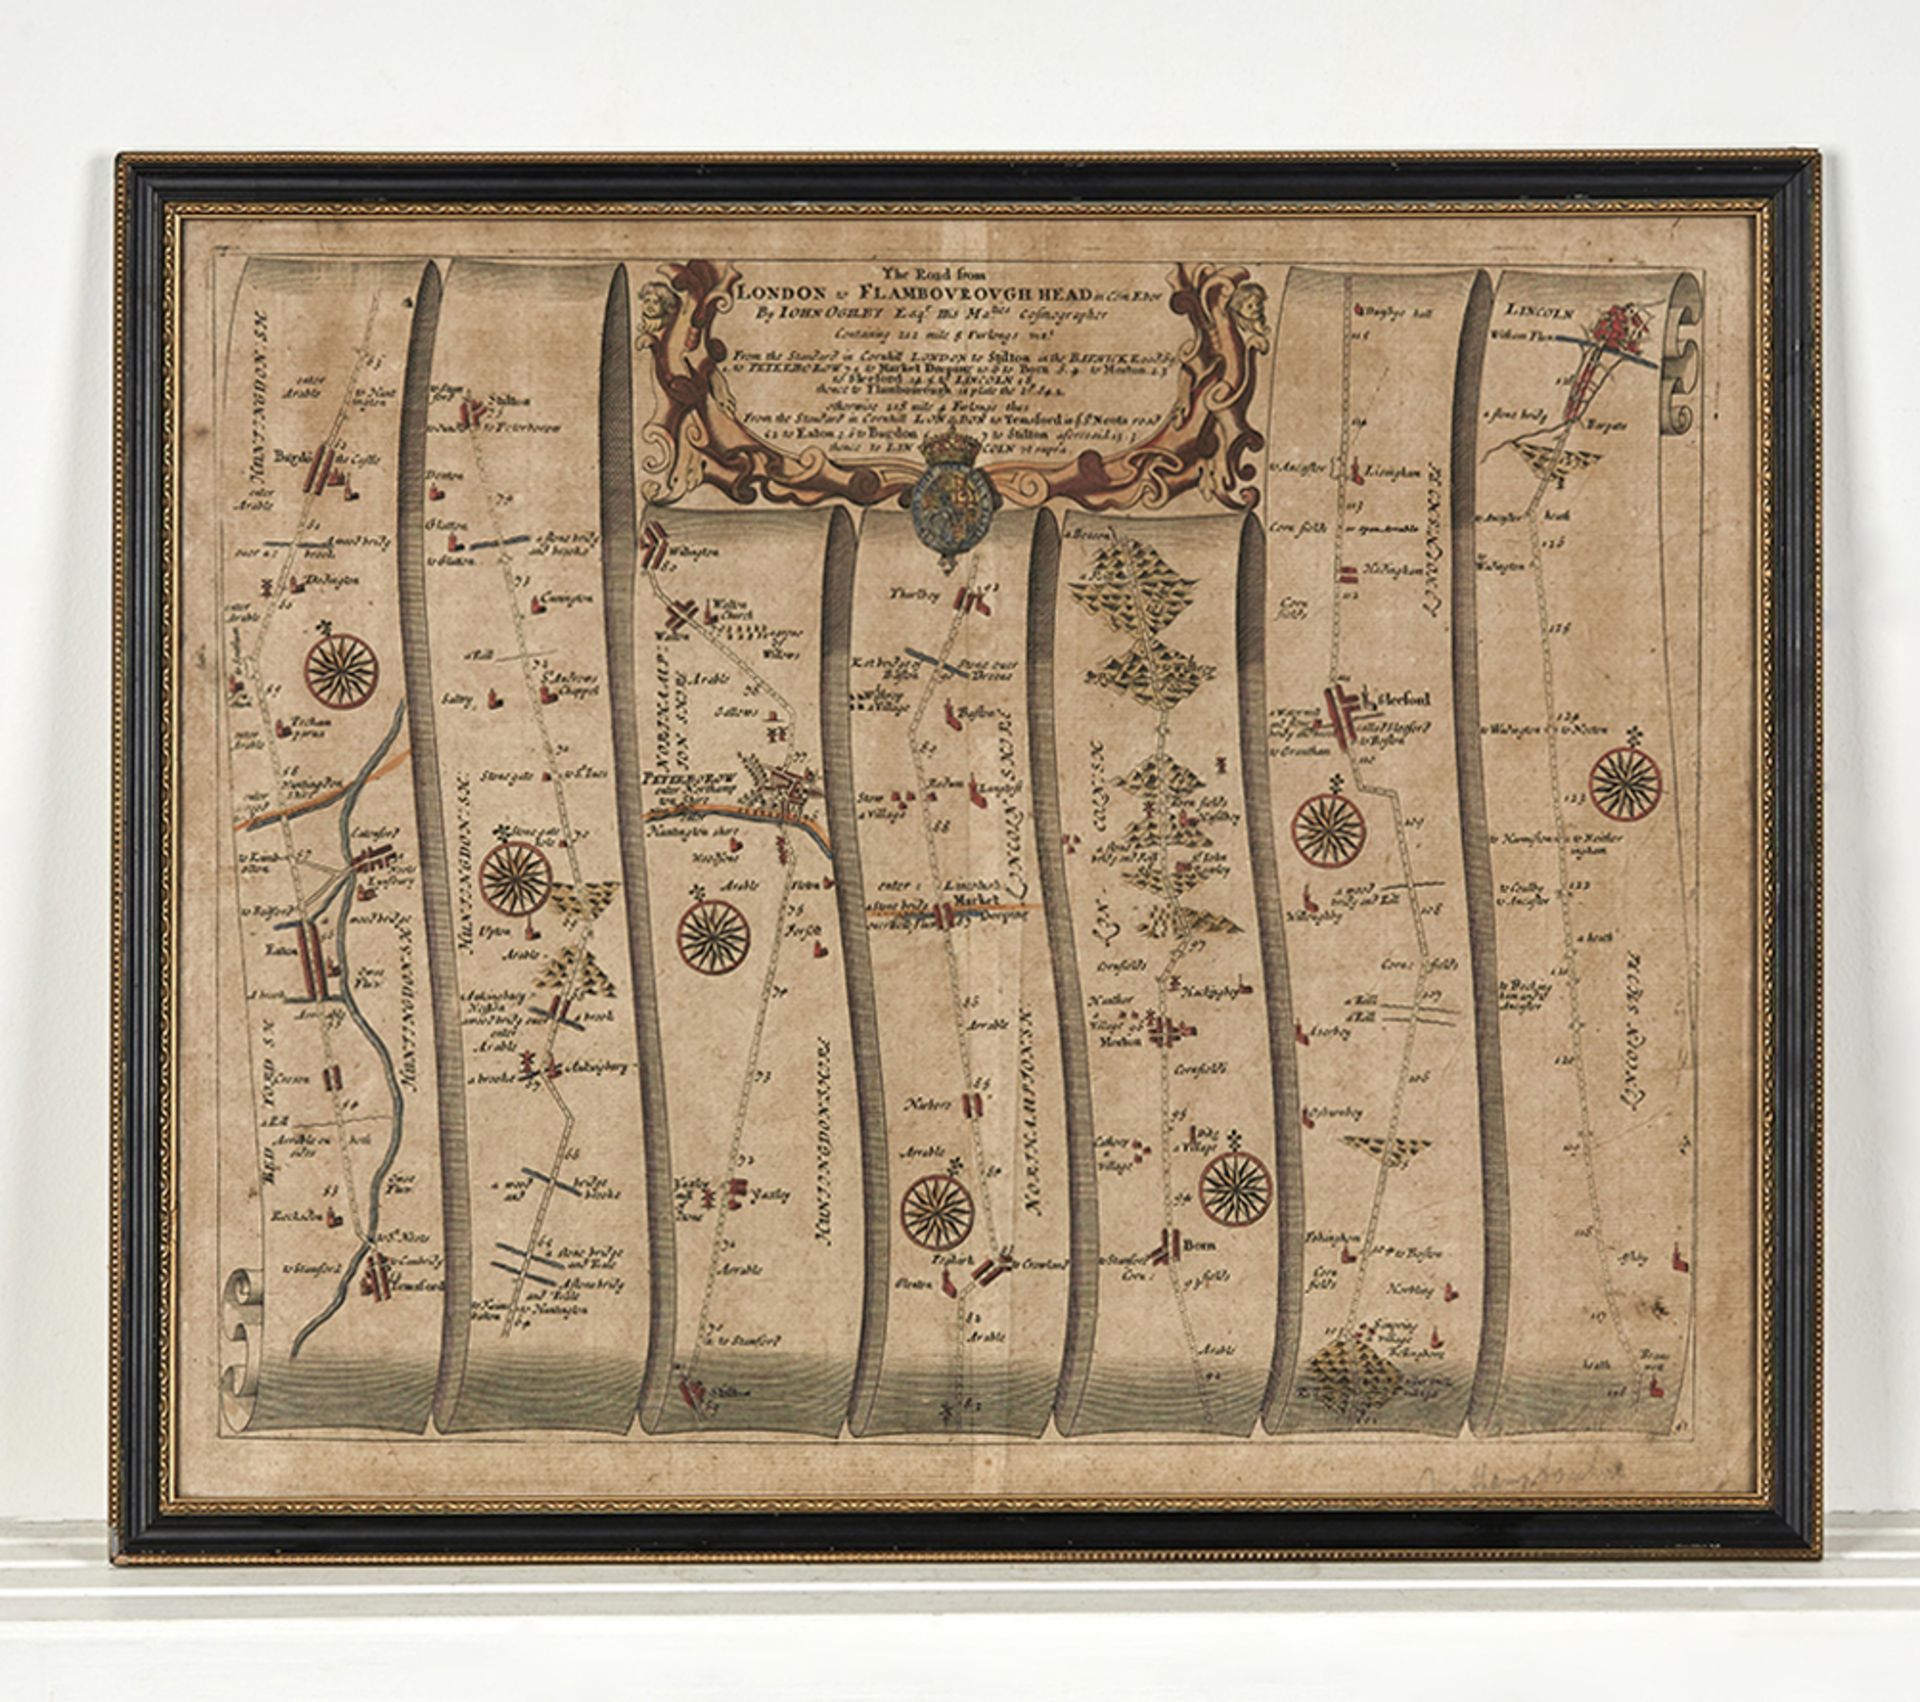 J. OGILBY, THE ROAD FROM LONDON TO FLAMBOROUGH HEAD 1777 - Image 9 of 9